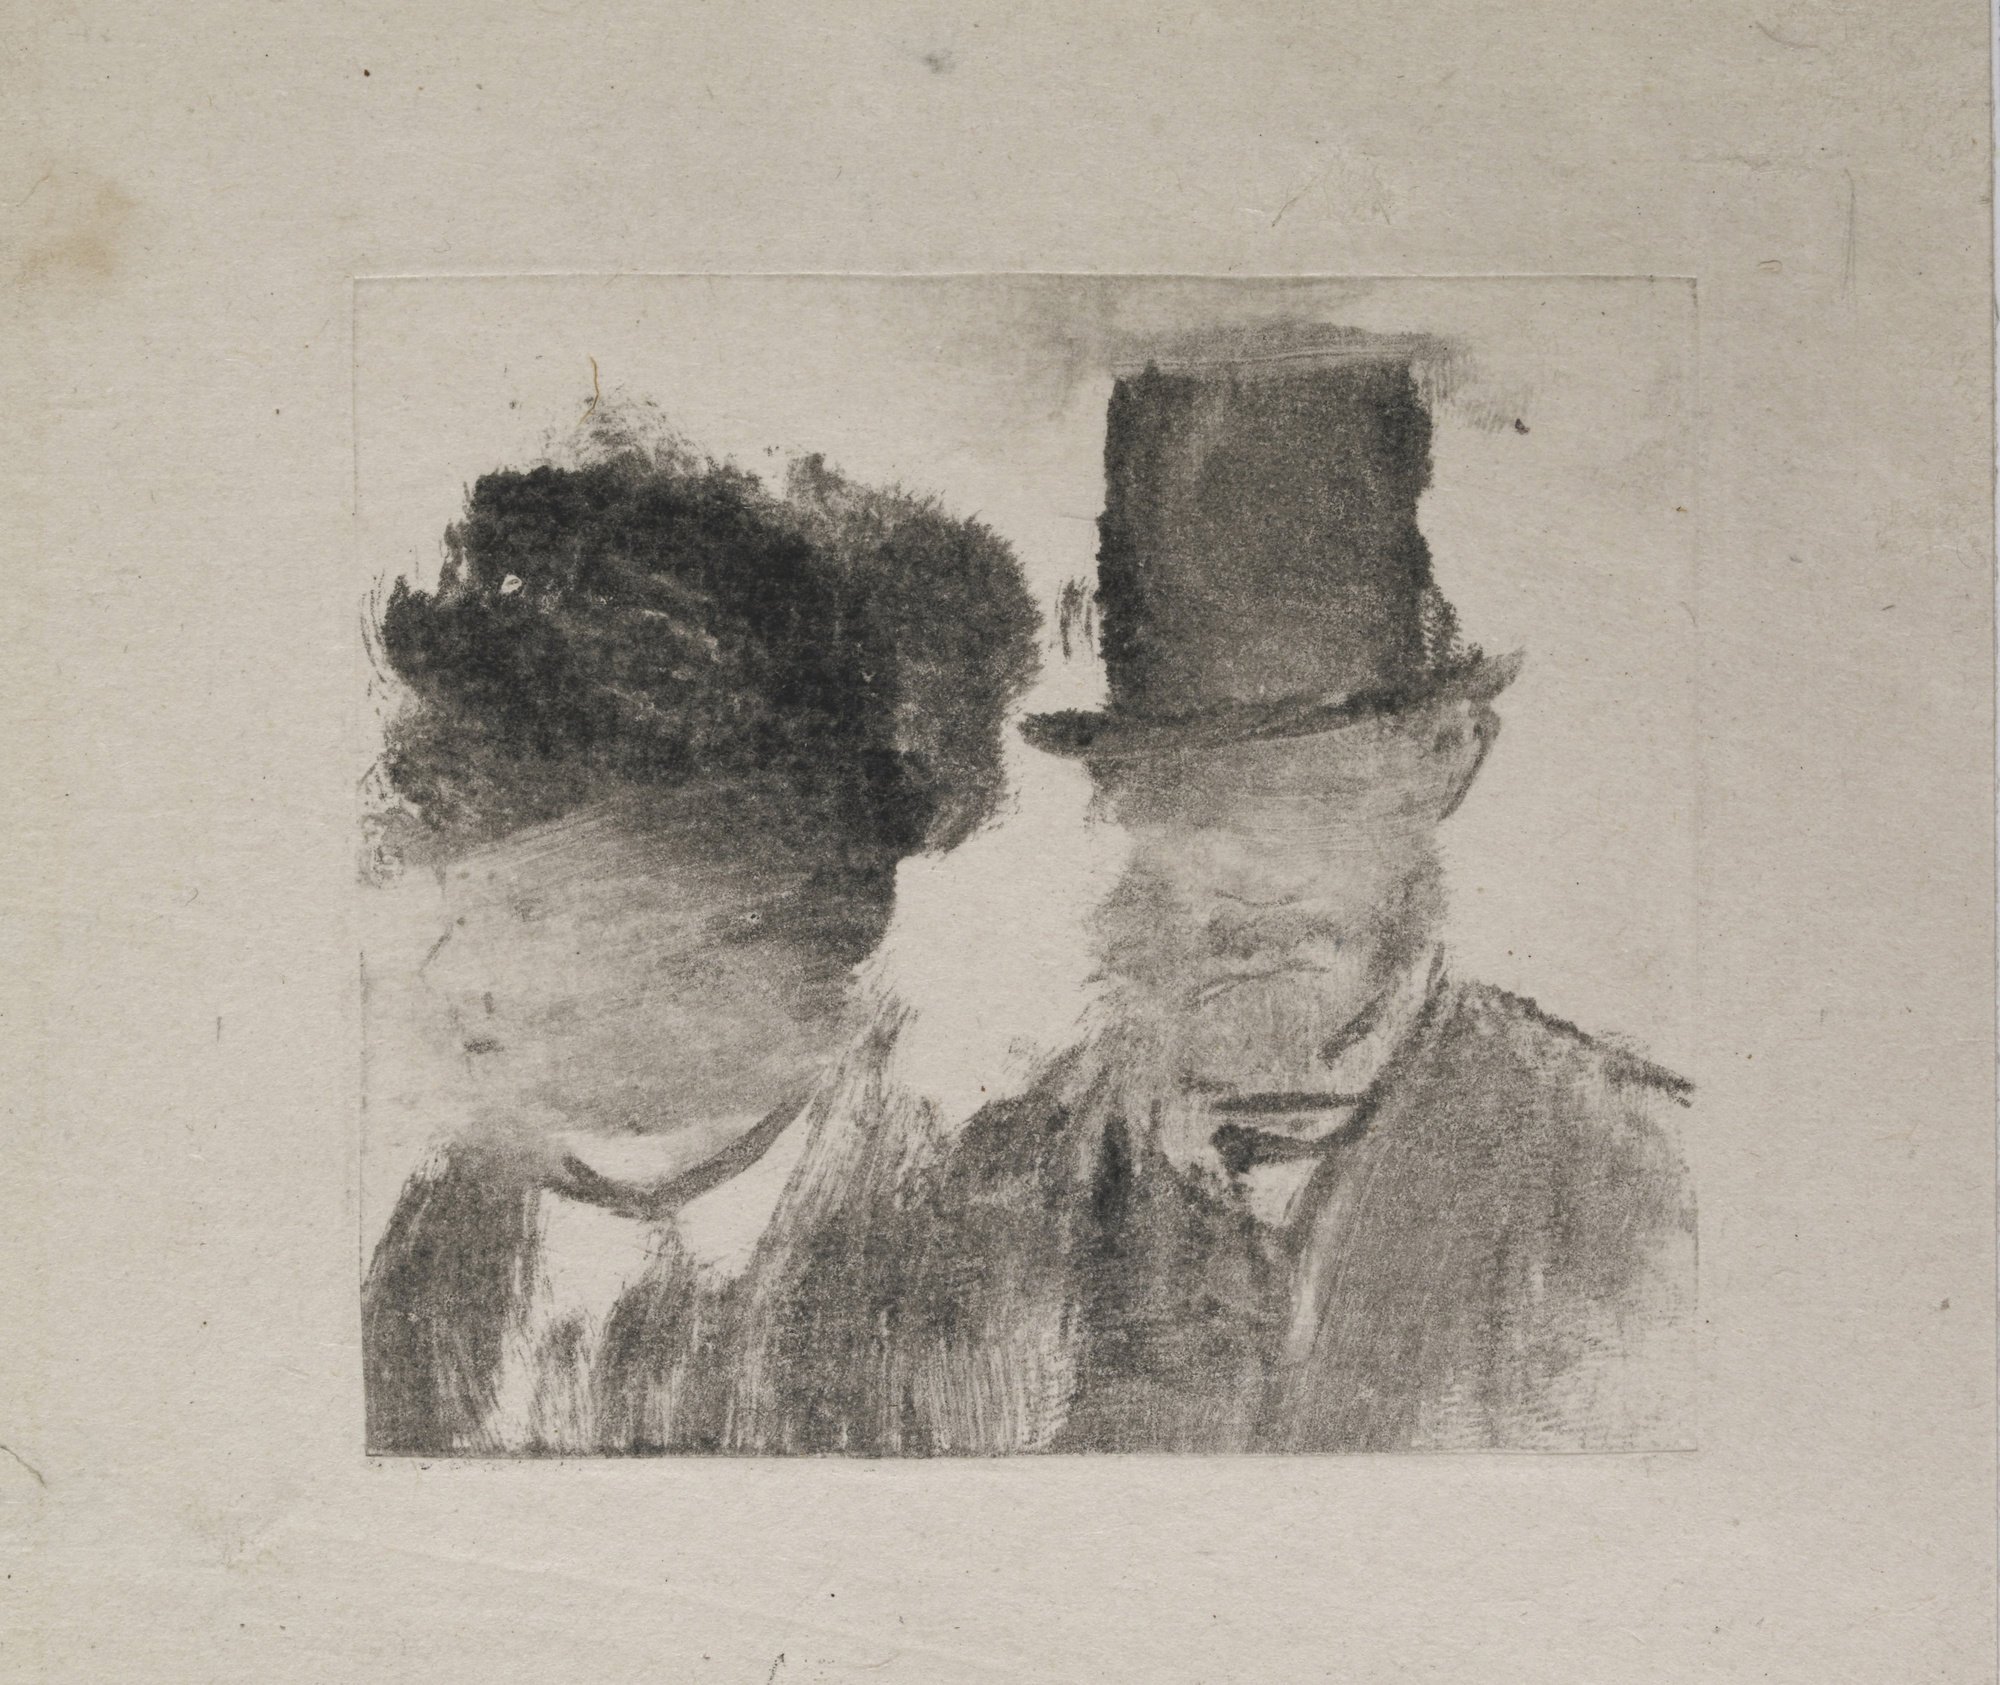 Edgar Degas, Heads of a Man and a Woman (1877–80).Photo: Courtesy of the Museum of Modern Art.